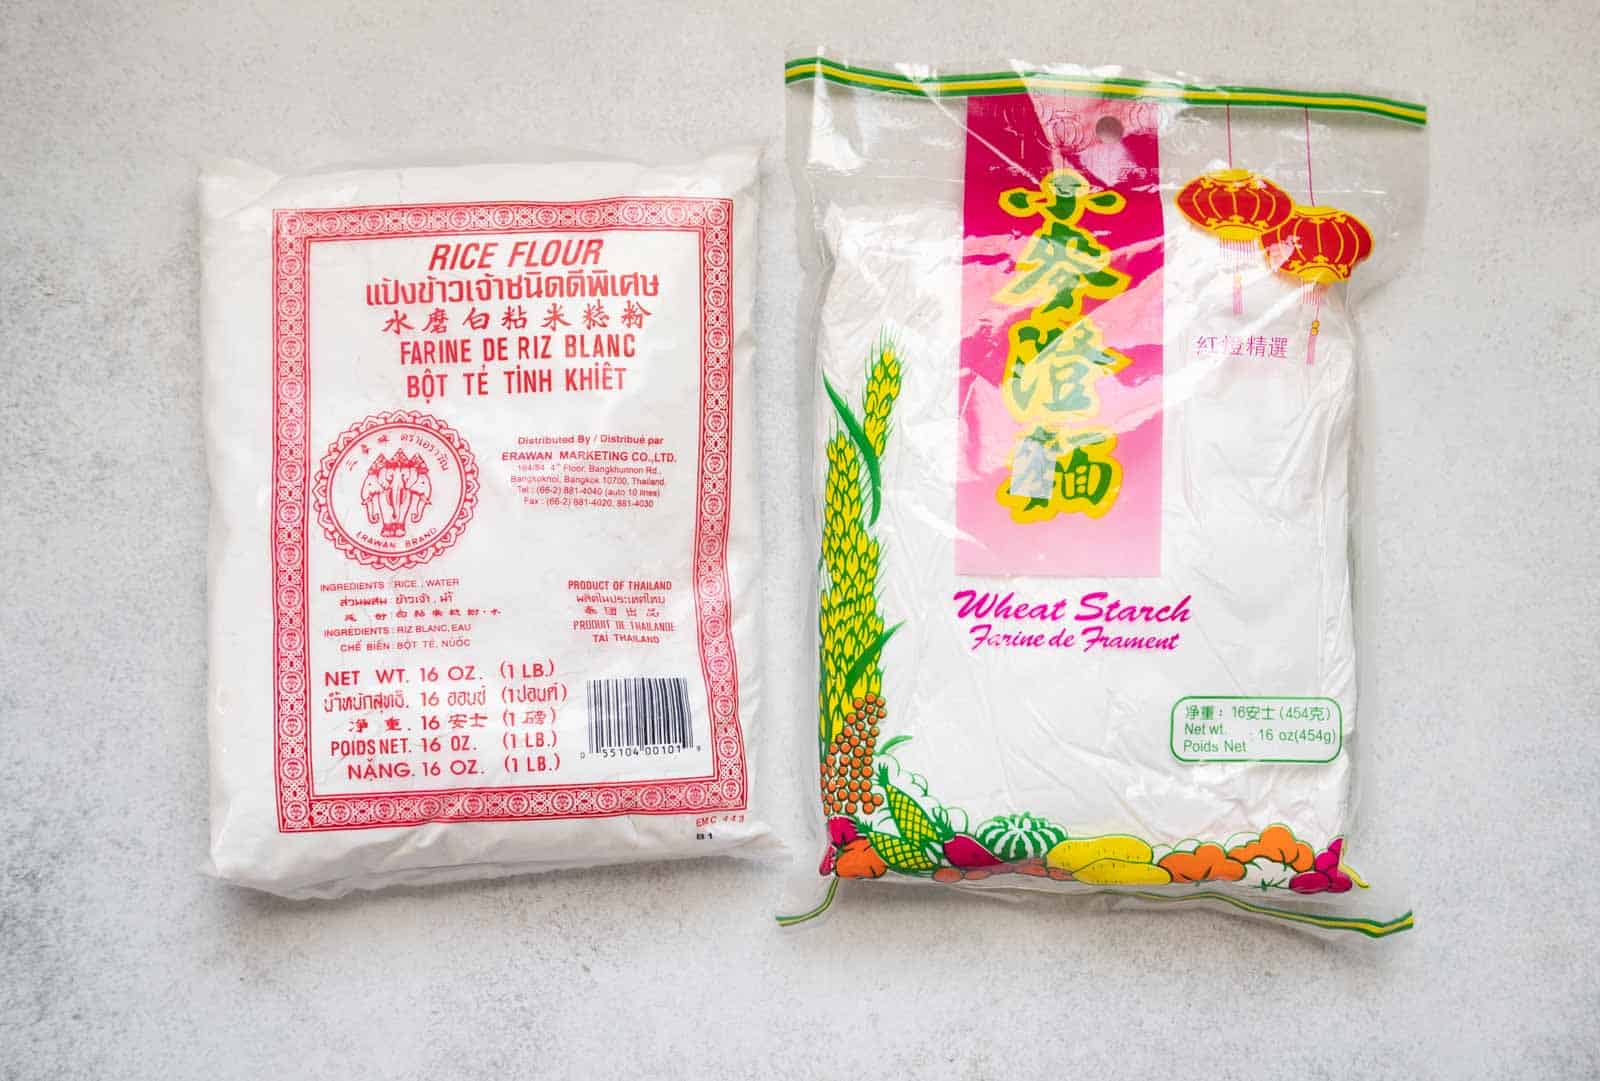 Rice flour and wheat starch